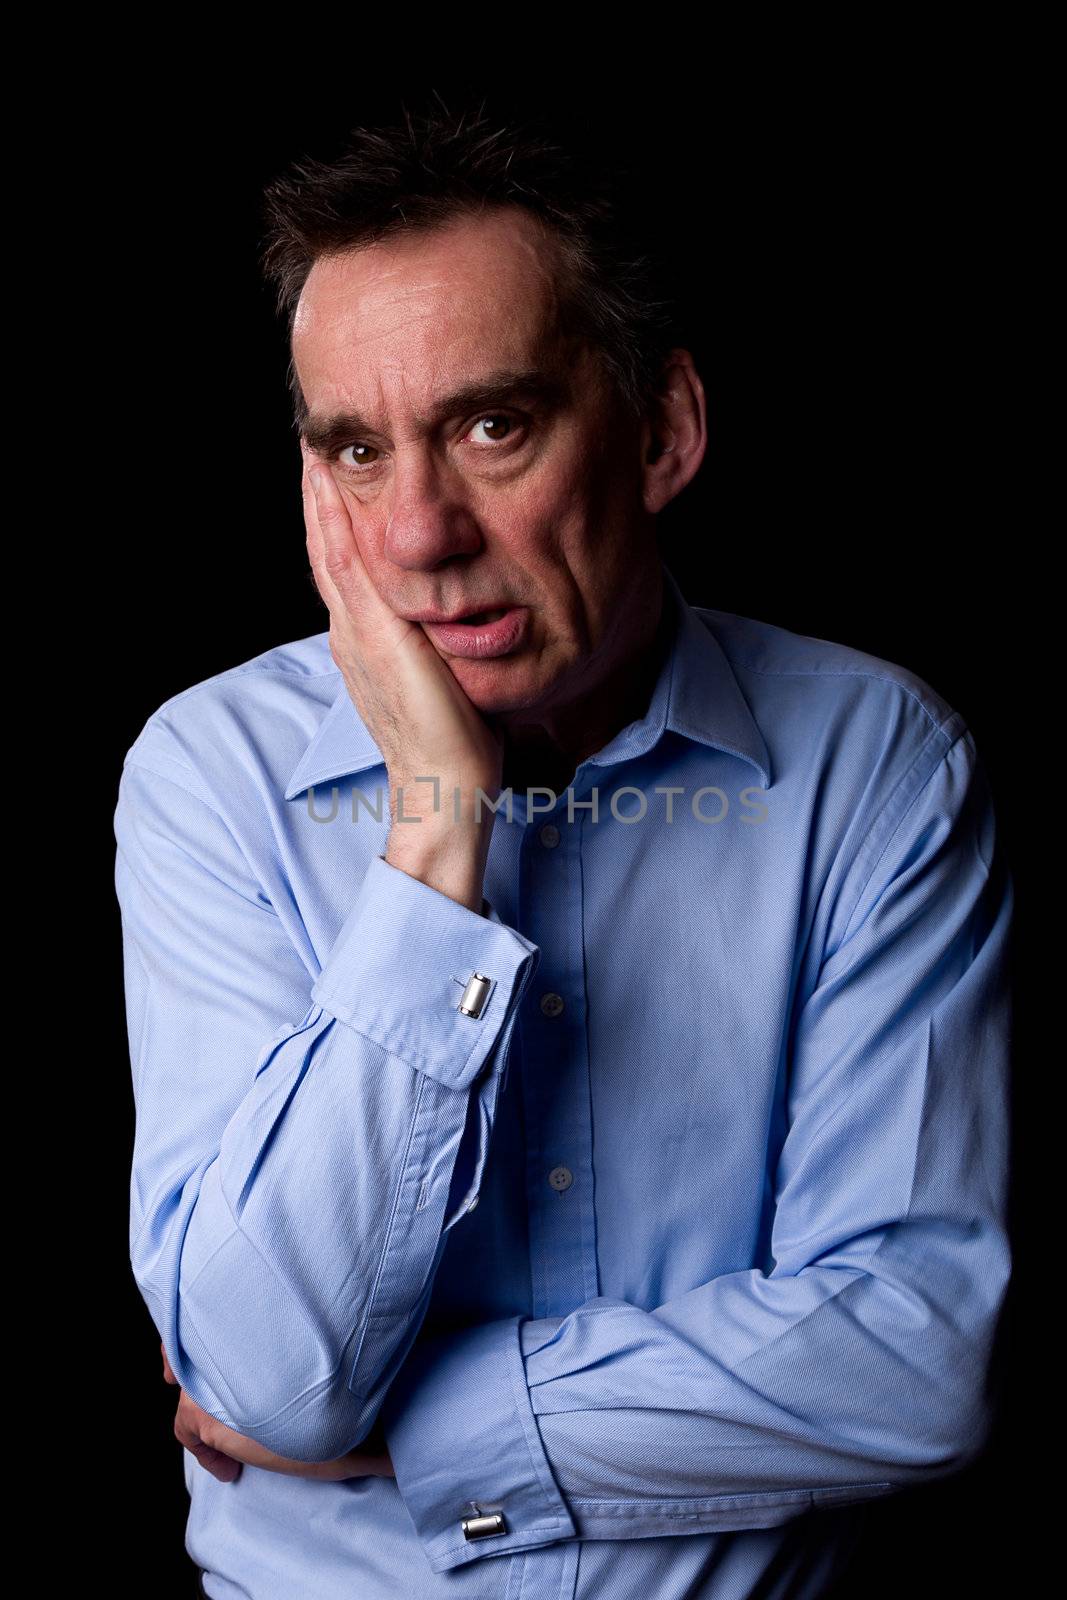 Sad Anxious Depressed Business Man with Hand to Chin by scheriton